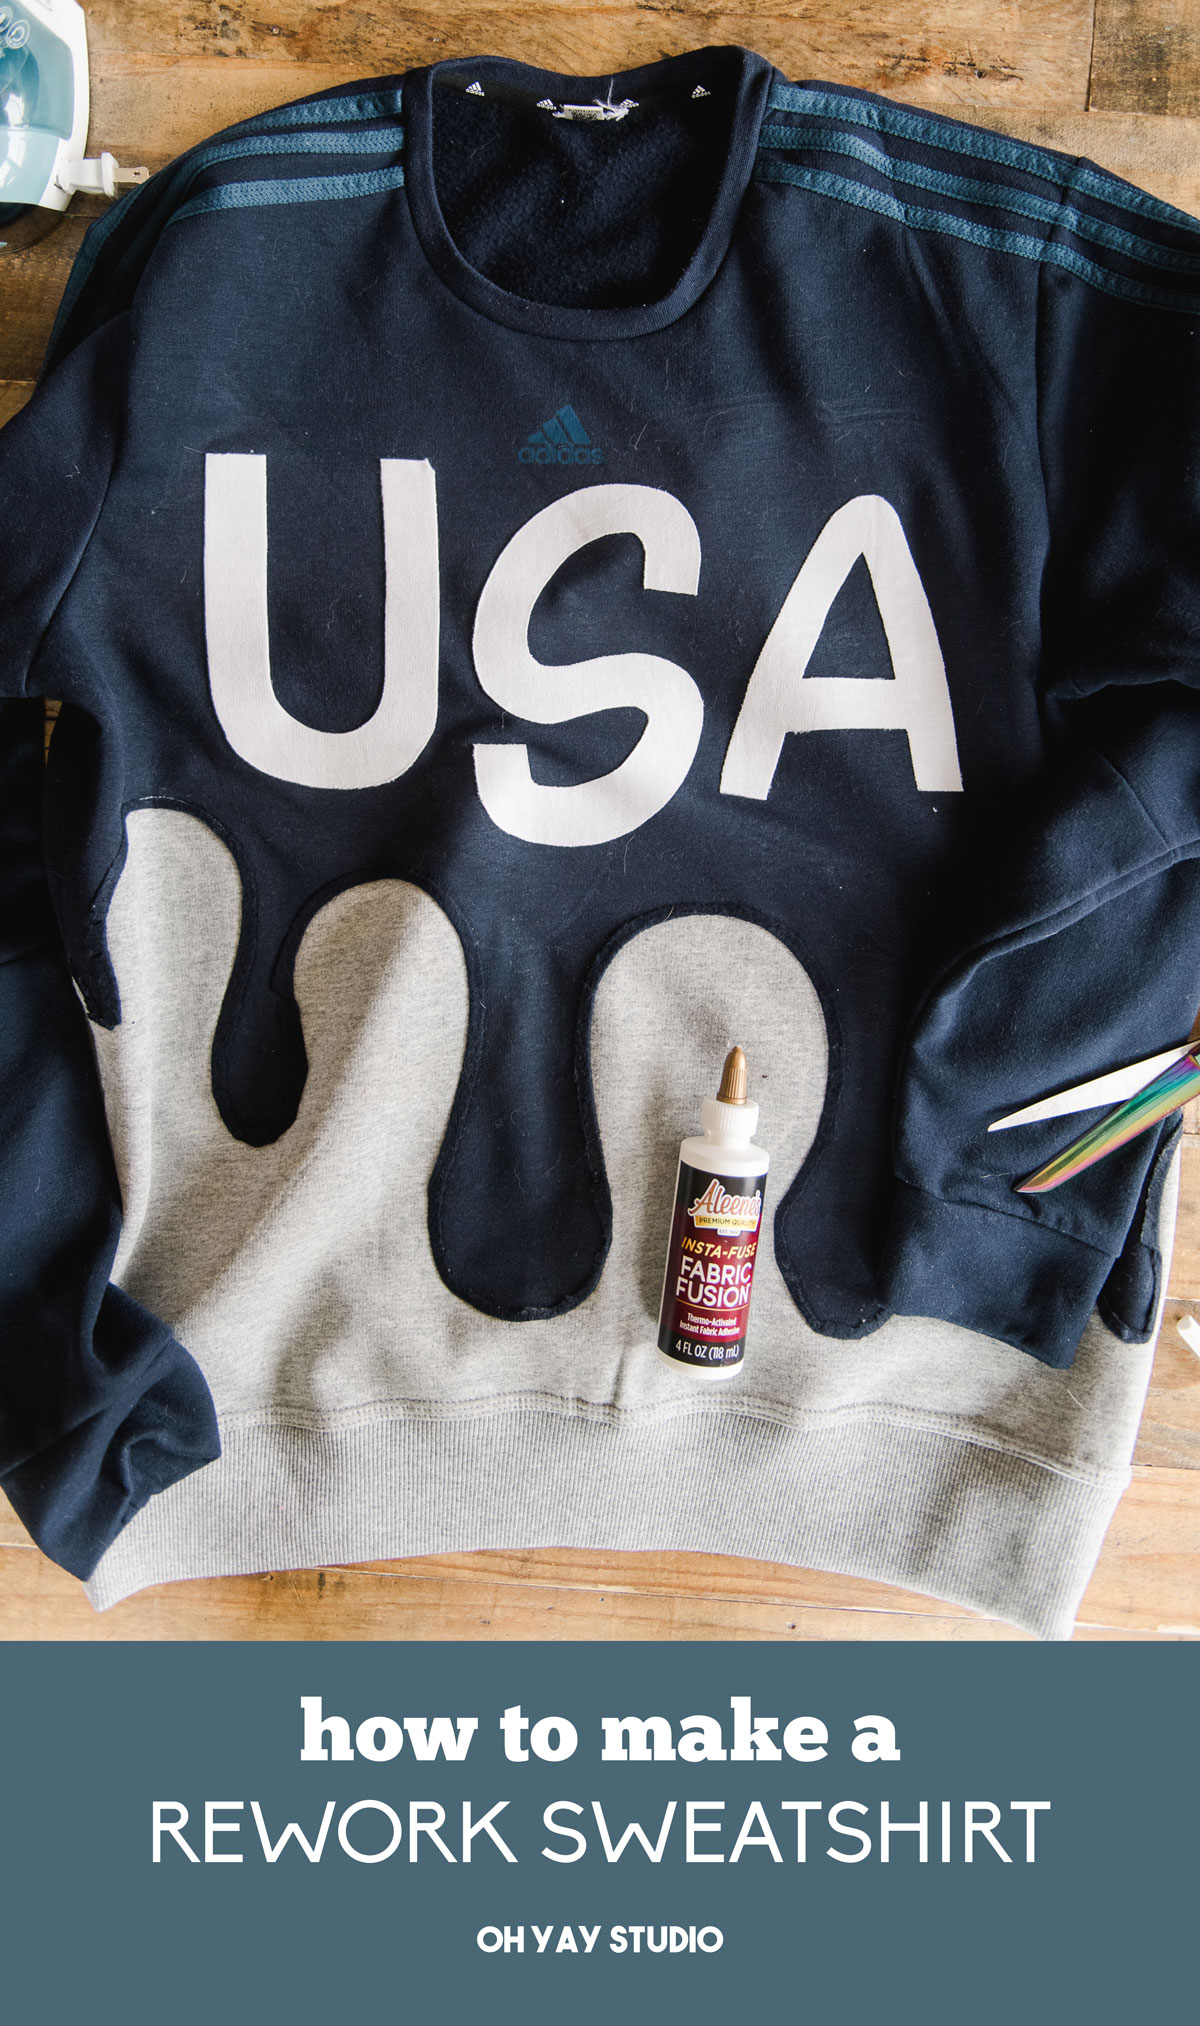 how to make a rework sweatshirt, no sew rework sweatshirt, usa patriotic sweatshirt, sewing sweatshirt, sewing project